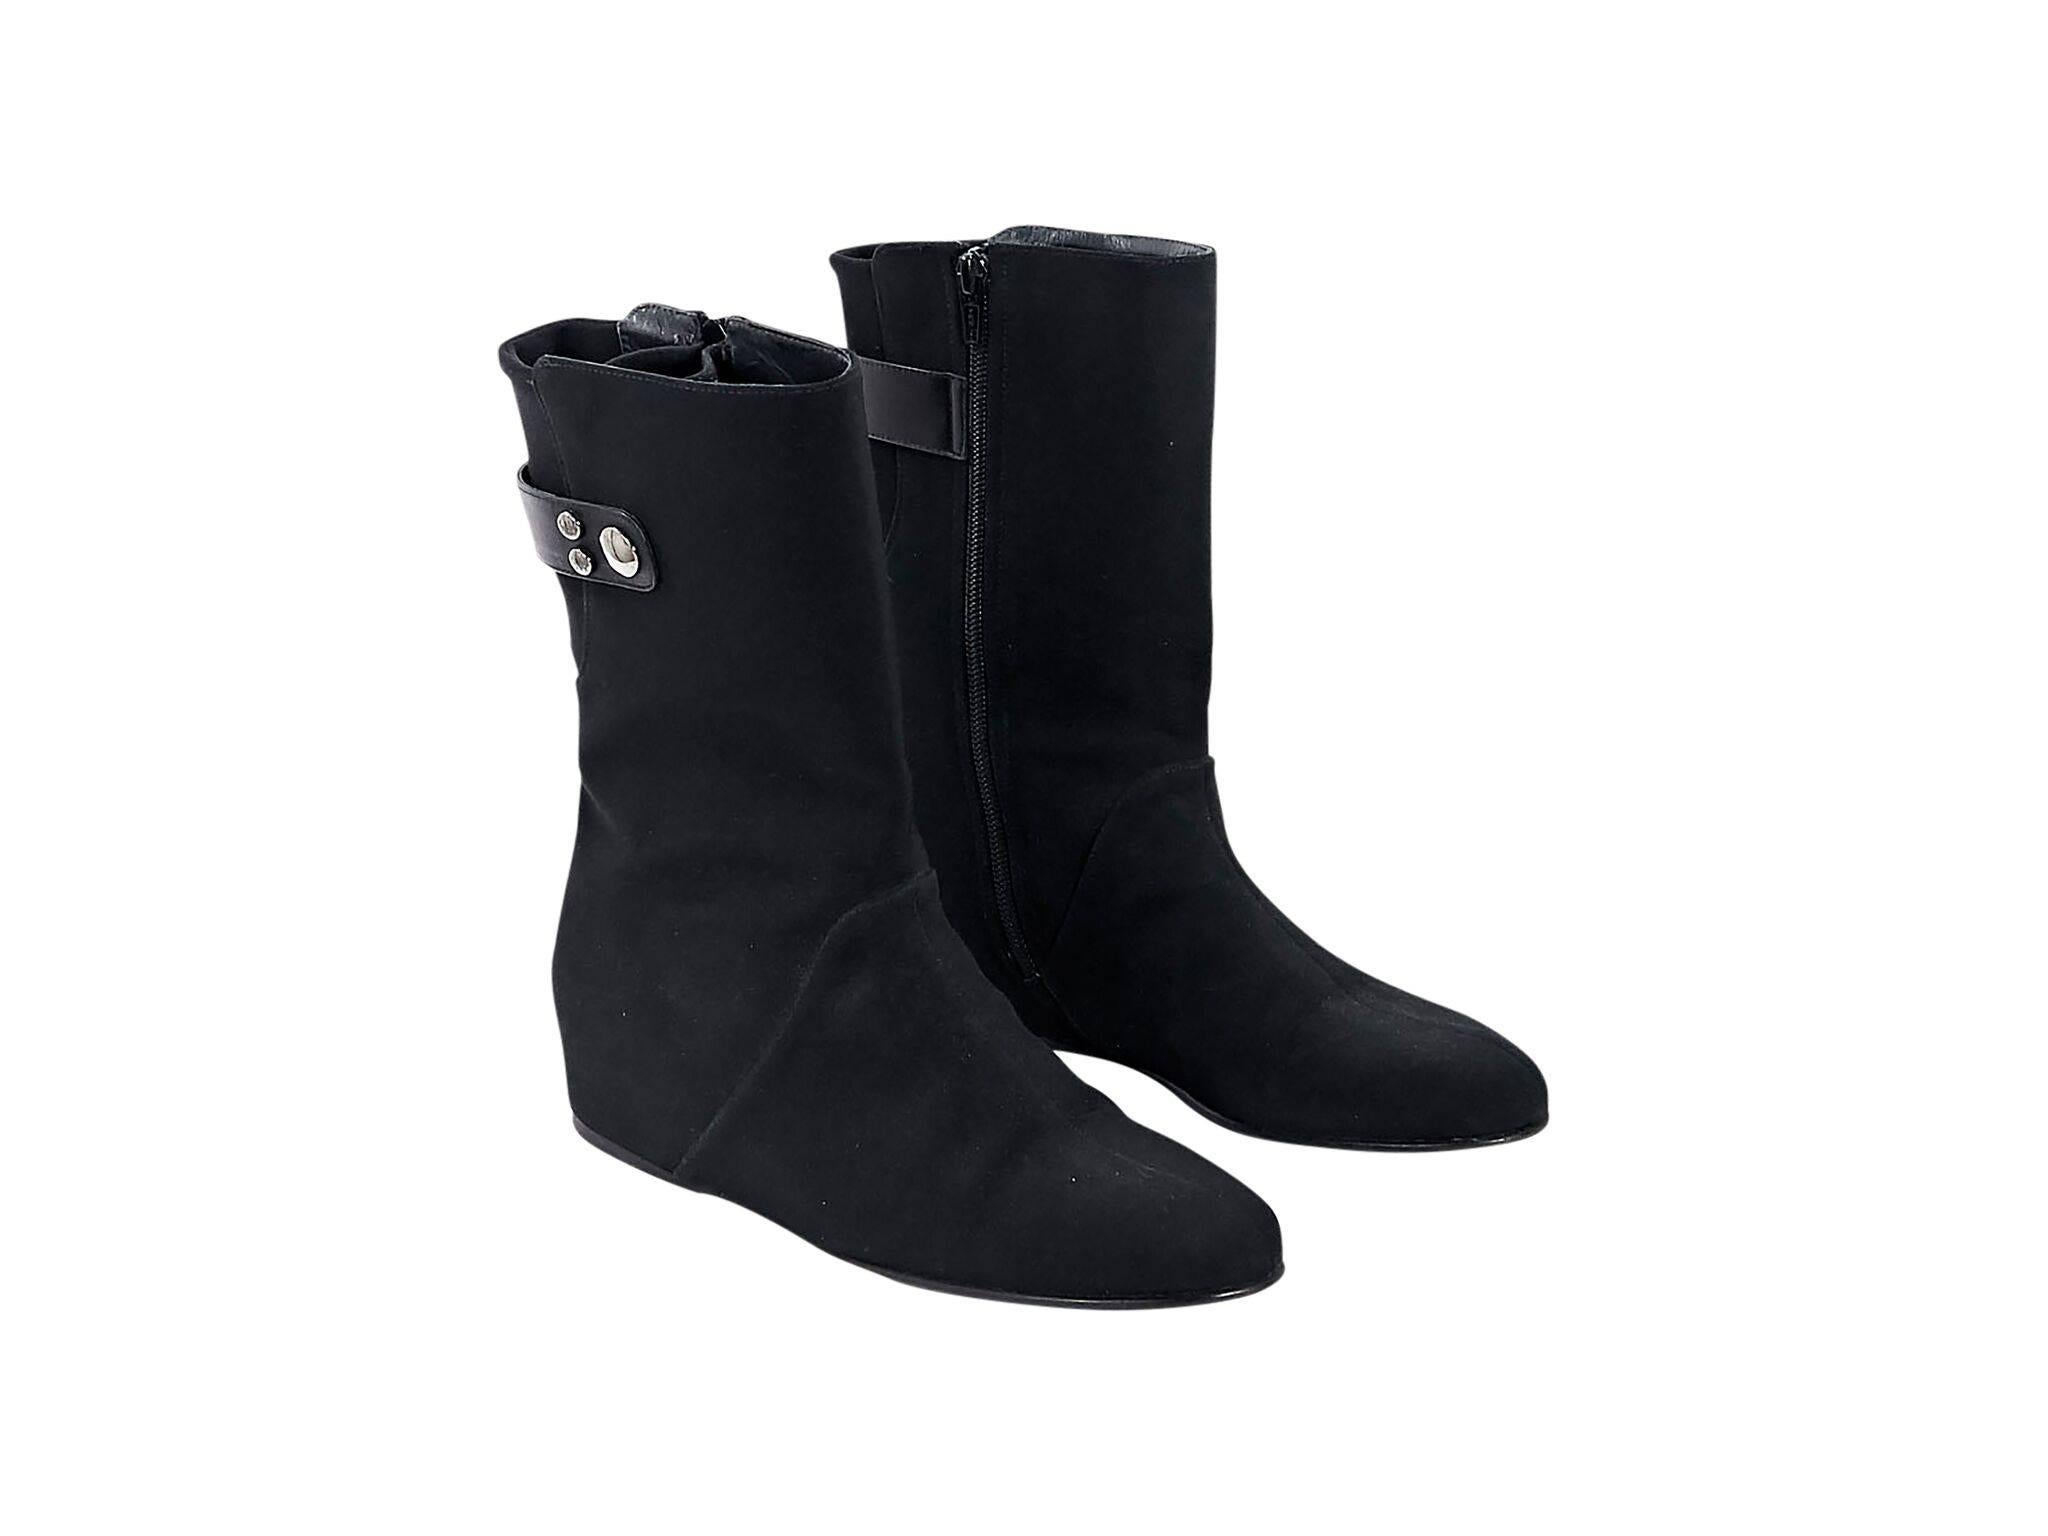 Product details:  Black wedge ankle boots by Stuart Weitzman.  Shaft strap accent.  Round toe.  Inner zip closure.  
Condition: Pre-owned. Very good.
Est. Retail $398

